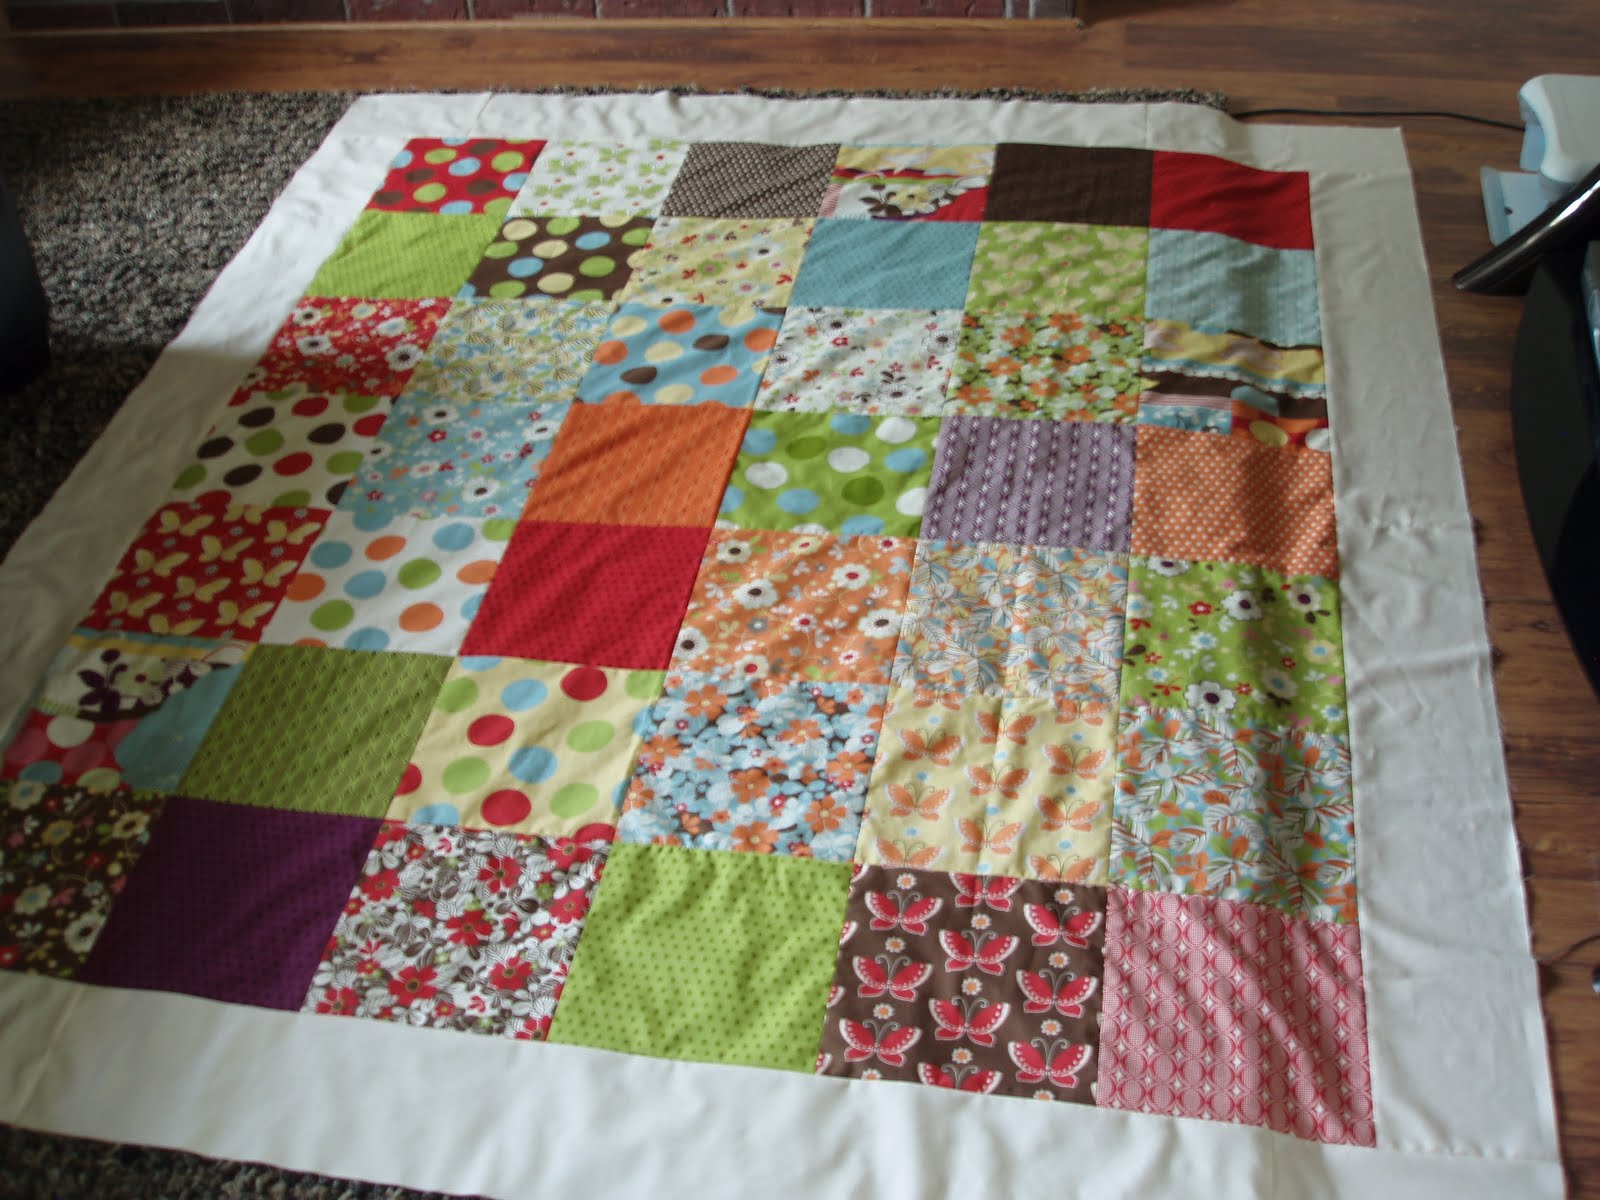 Sew Much Beauty: So many projects, so little time!